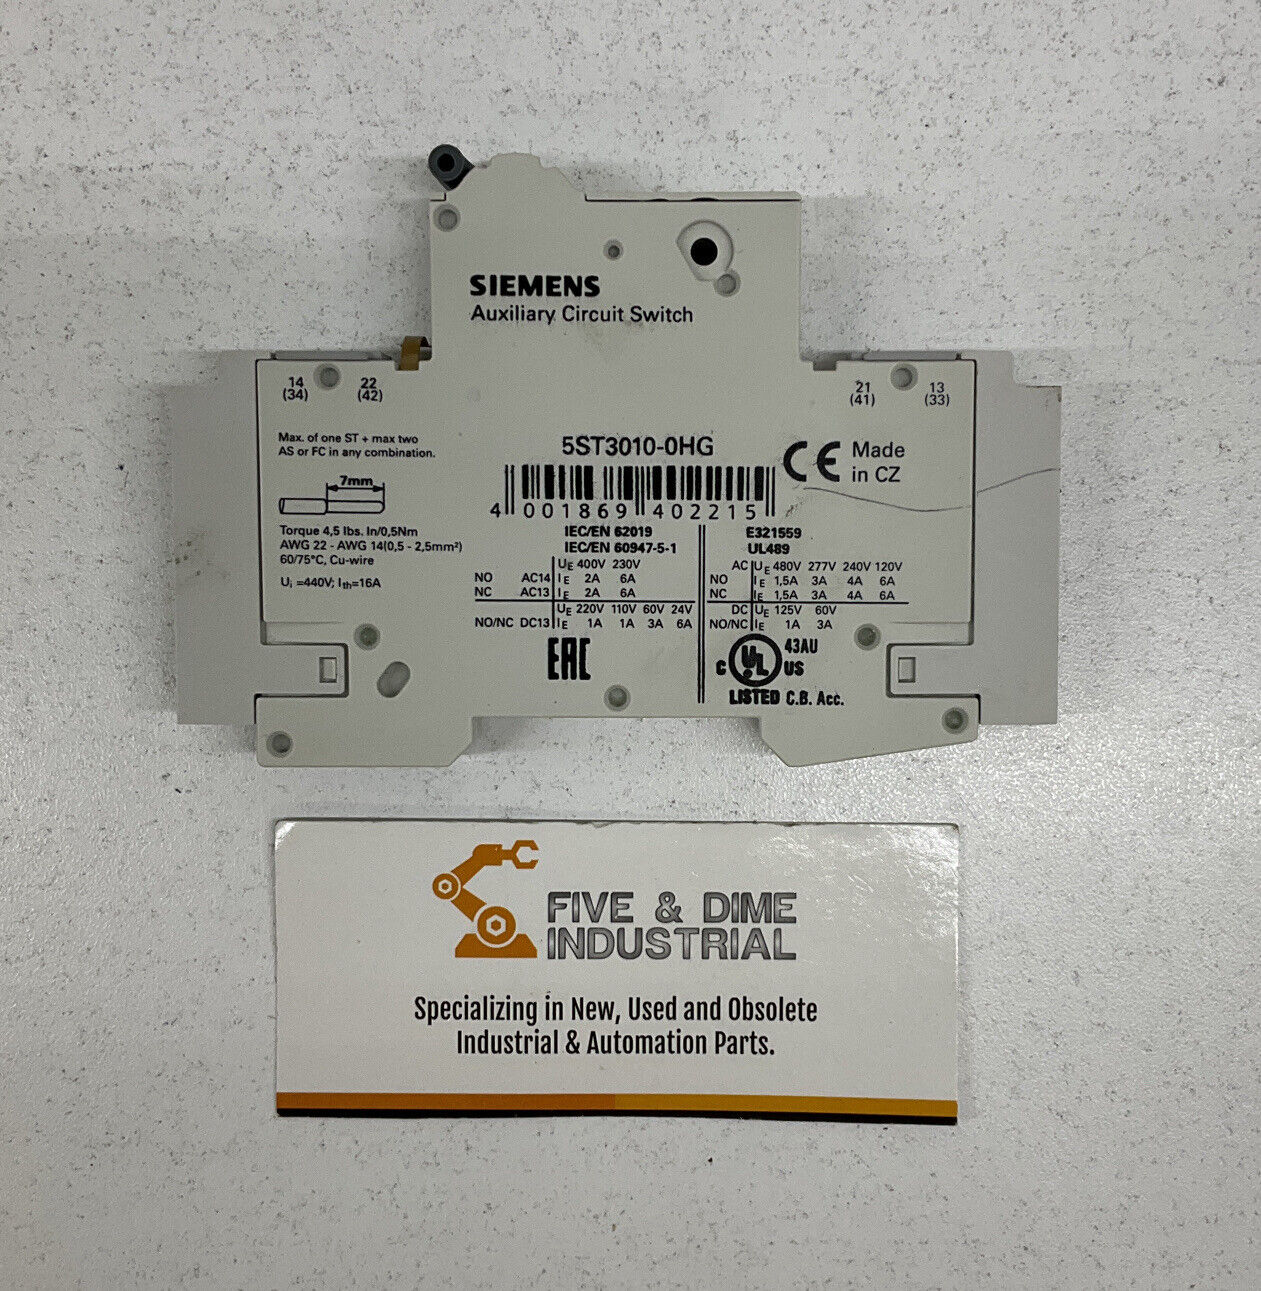 Siemens 5ST3-011-0HG Auxiliary Circuit Switch  (GR150)